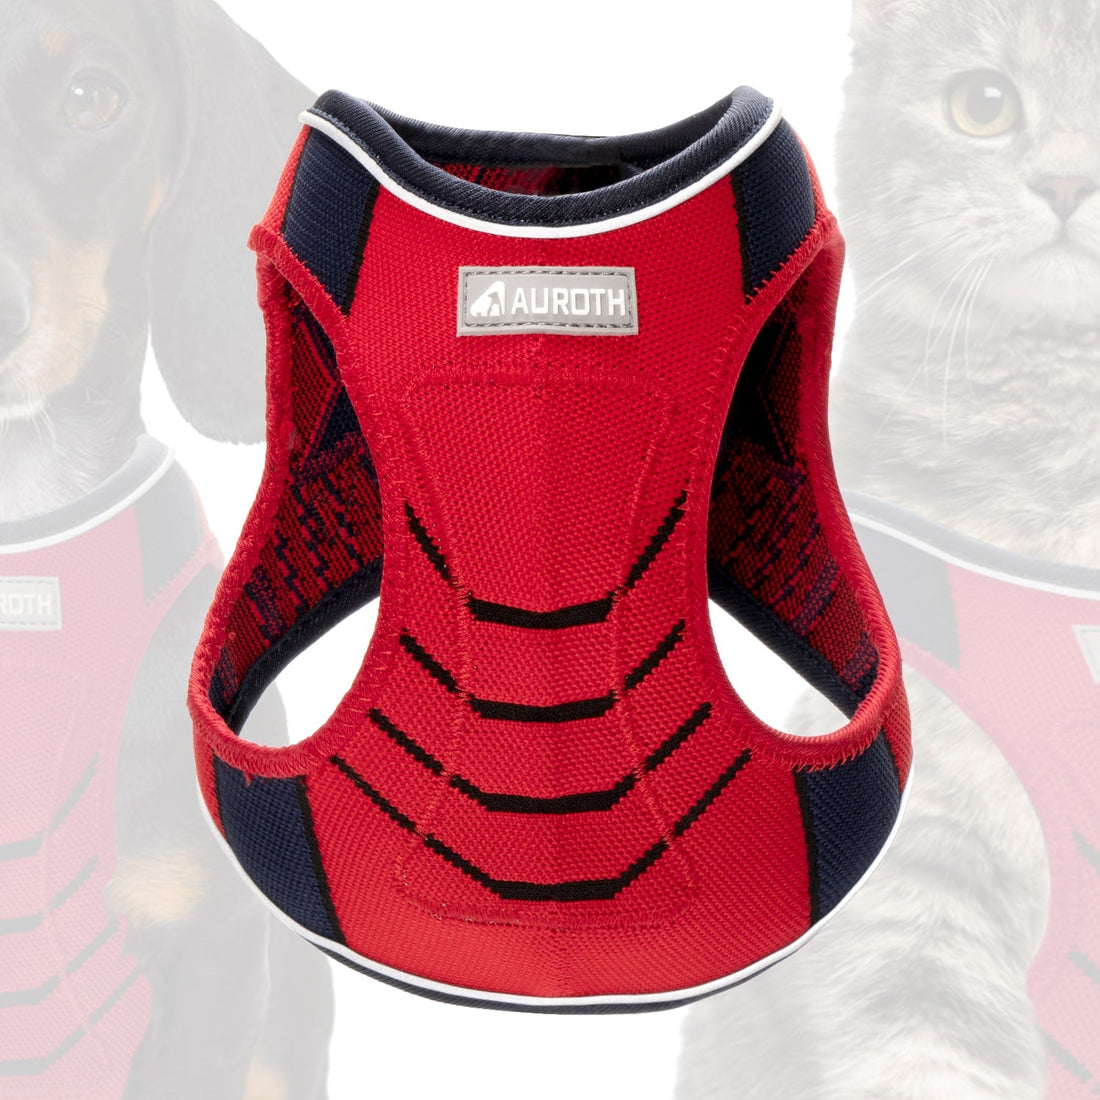 Auroth Dog Harness - Lite Series Step-in Dog Harness Cat Harness - Red